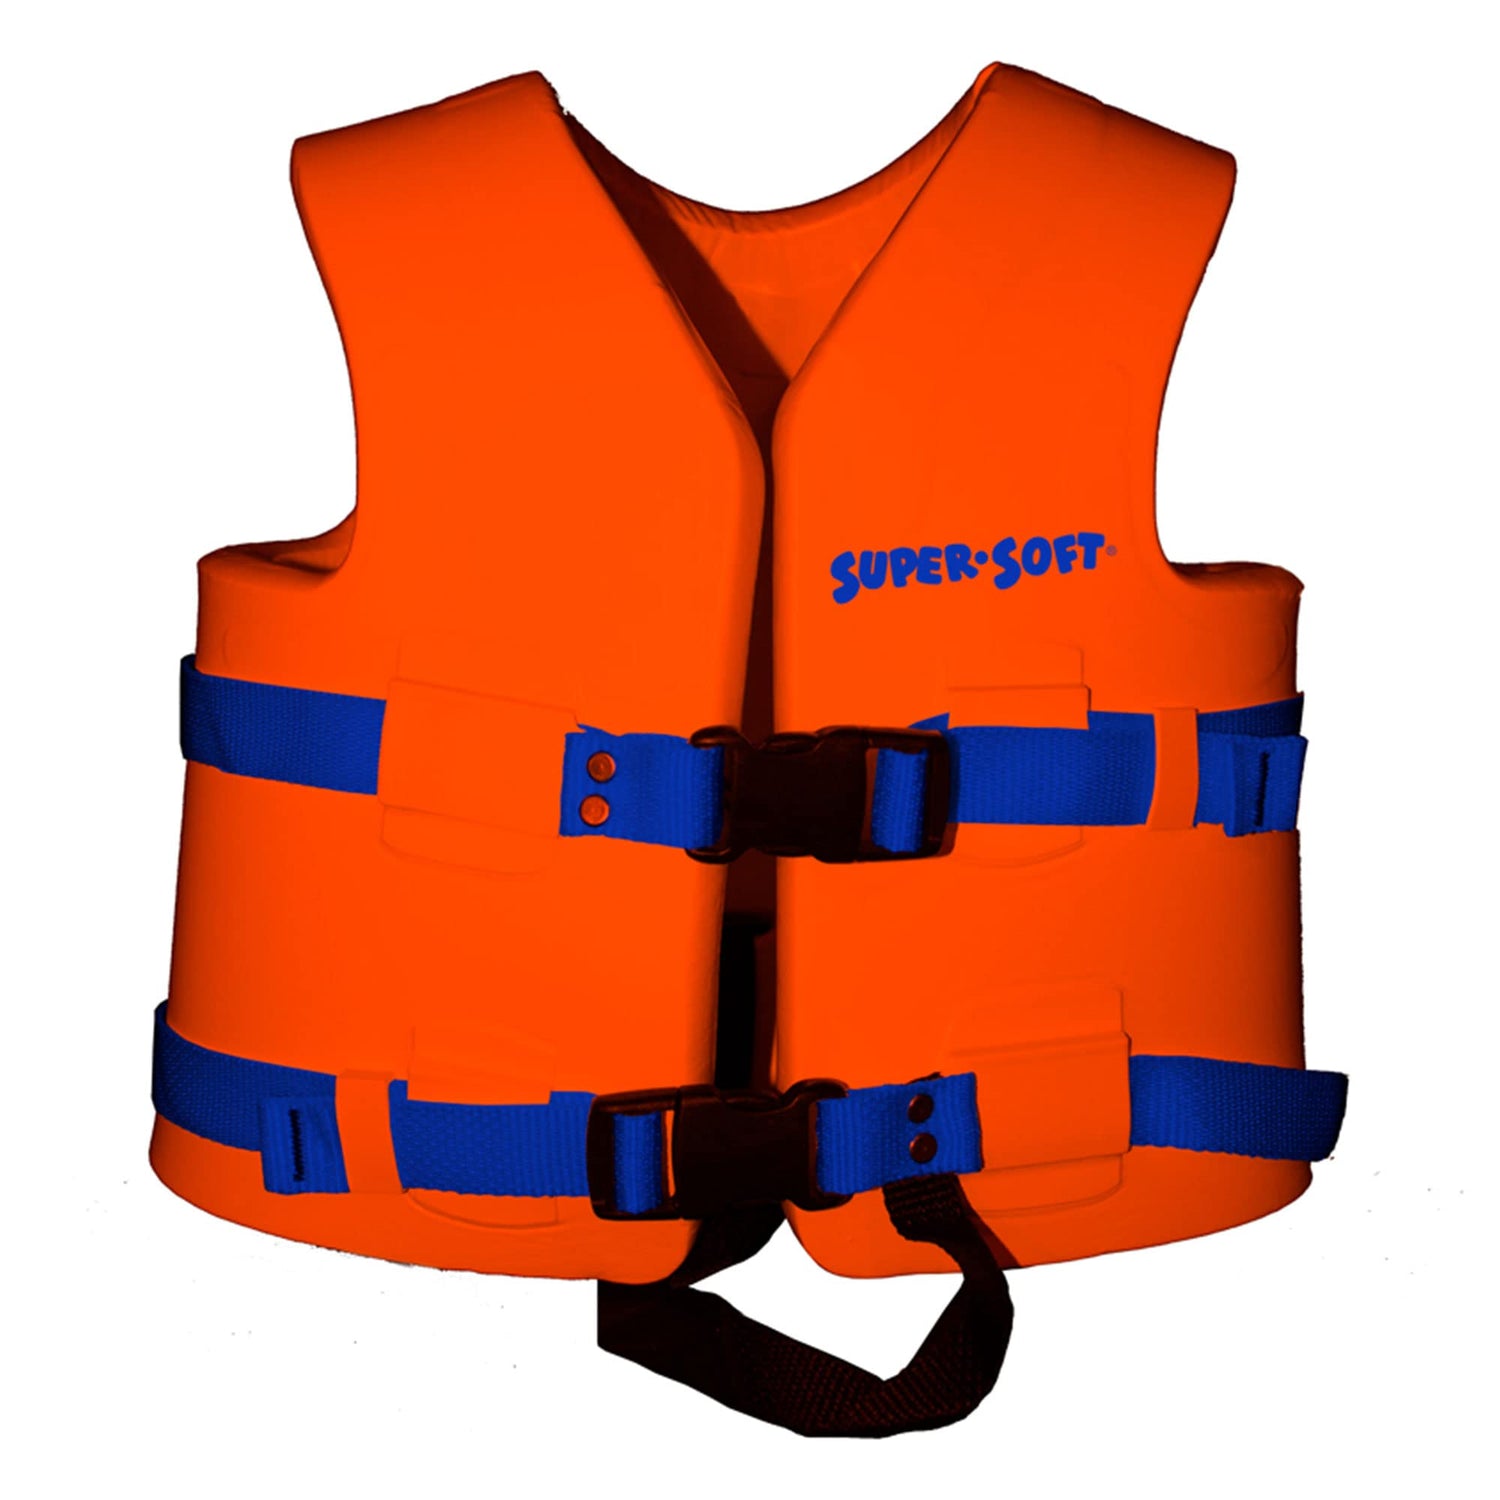 TRC Recreation Super Soft Child Size Small Life Jacket USCG Approved Vinyl Coated Foam Swim Vest for Kids Swimming Pool and Beach Gear, Sunset Orange